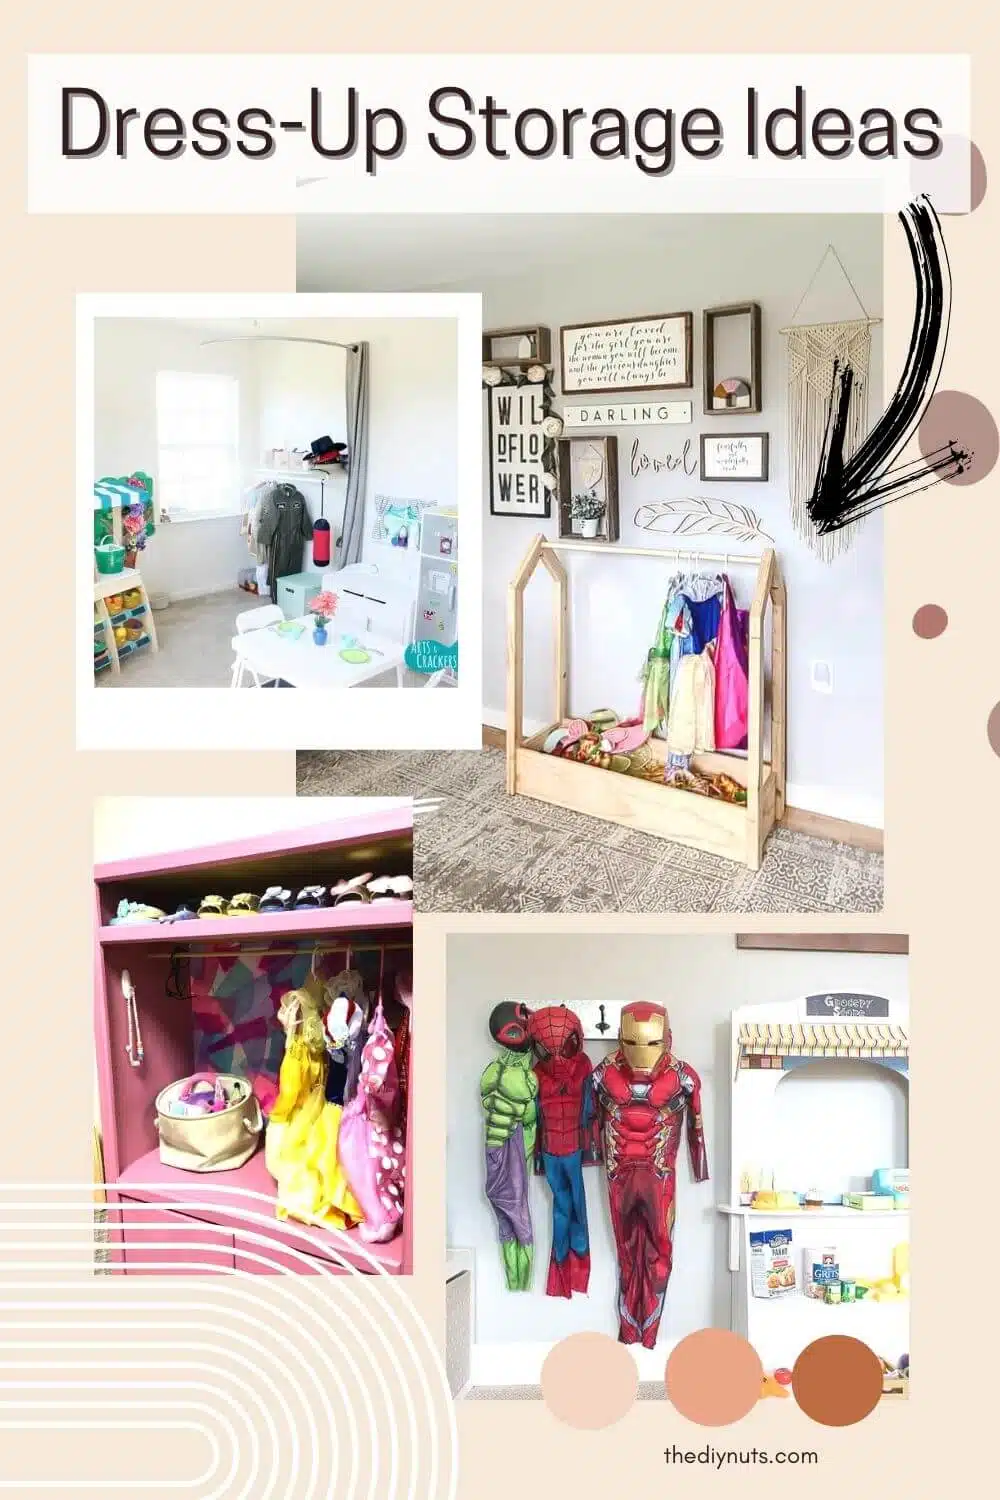 Dress up storage ideas with collage of different DIY dress-up ideas.